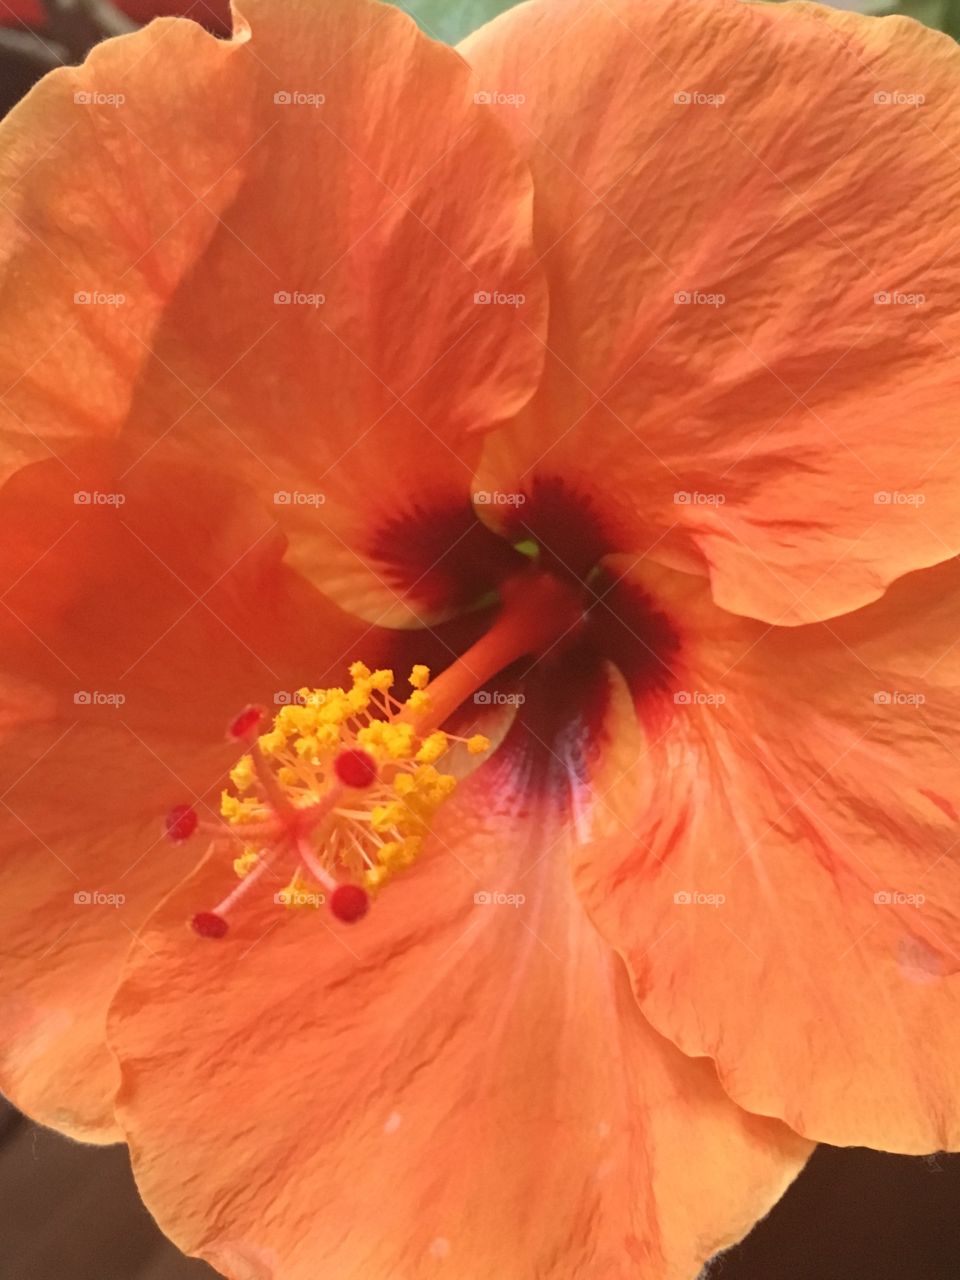 Hibiscus-A close up look at the center of an orange/peach Hibiscus flower.   